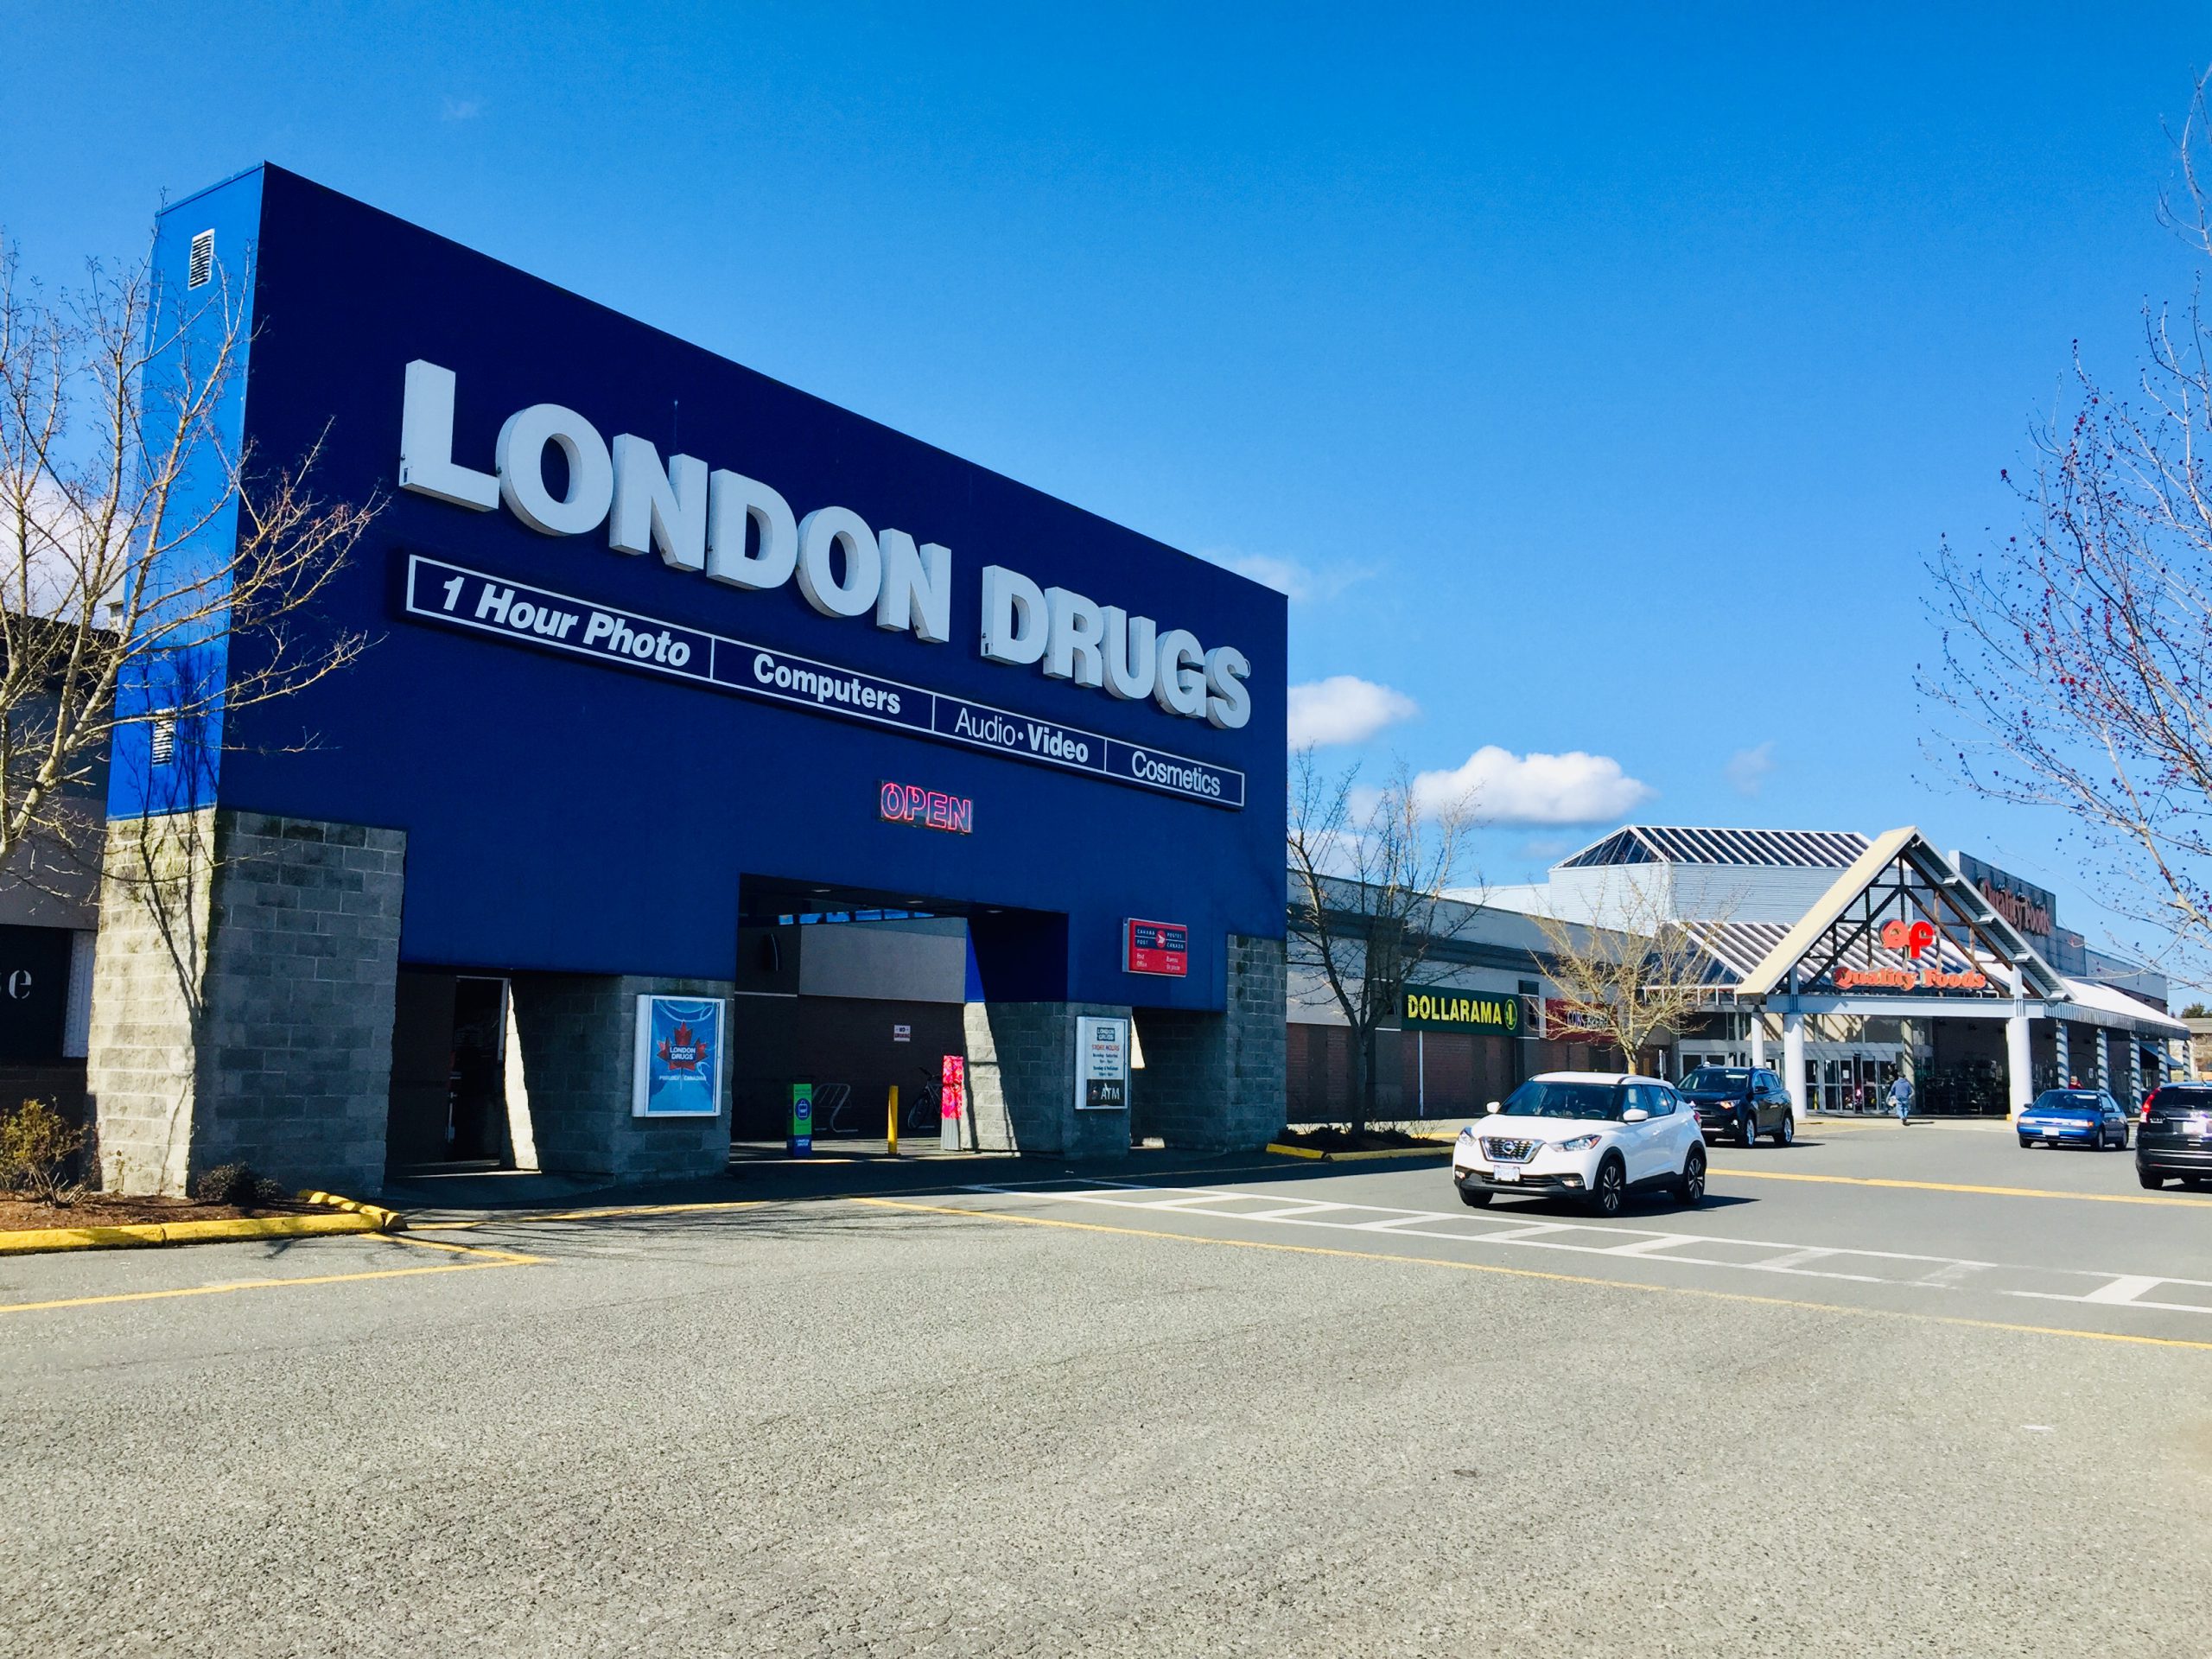 London Drugs steps up to support small businesses - My Cowichan Valley Now